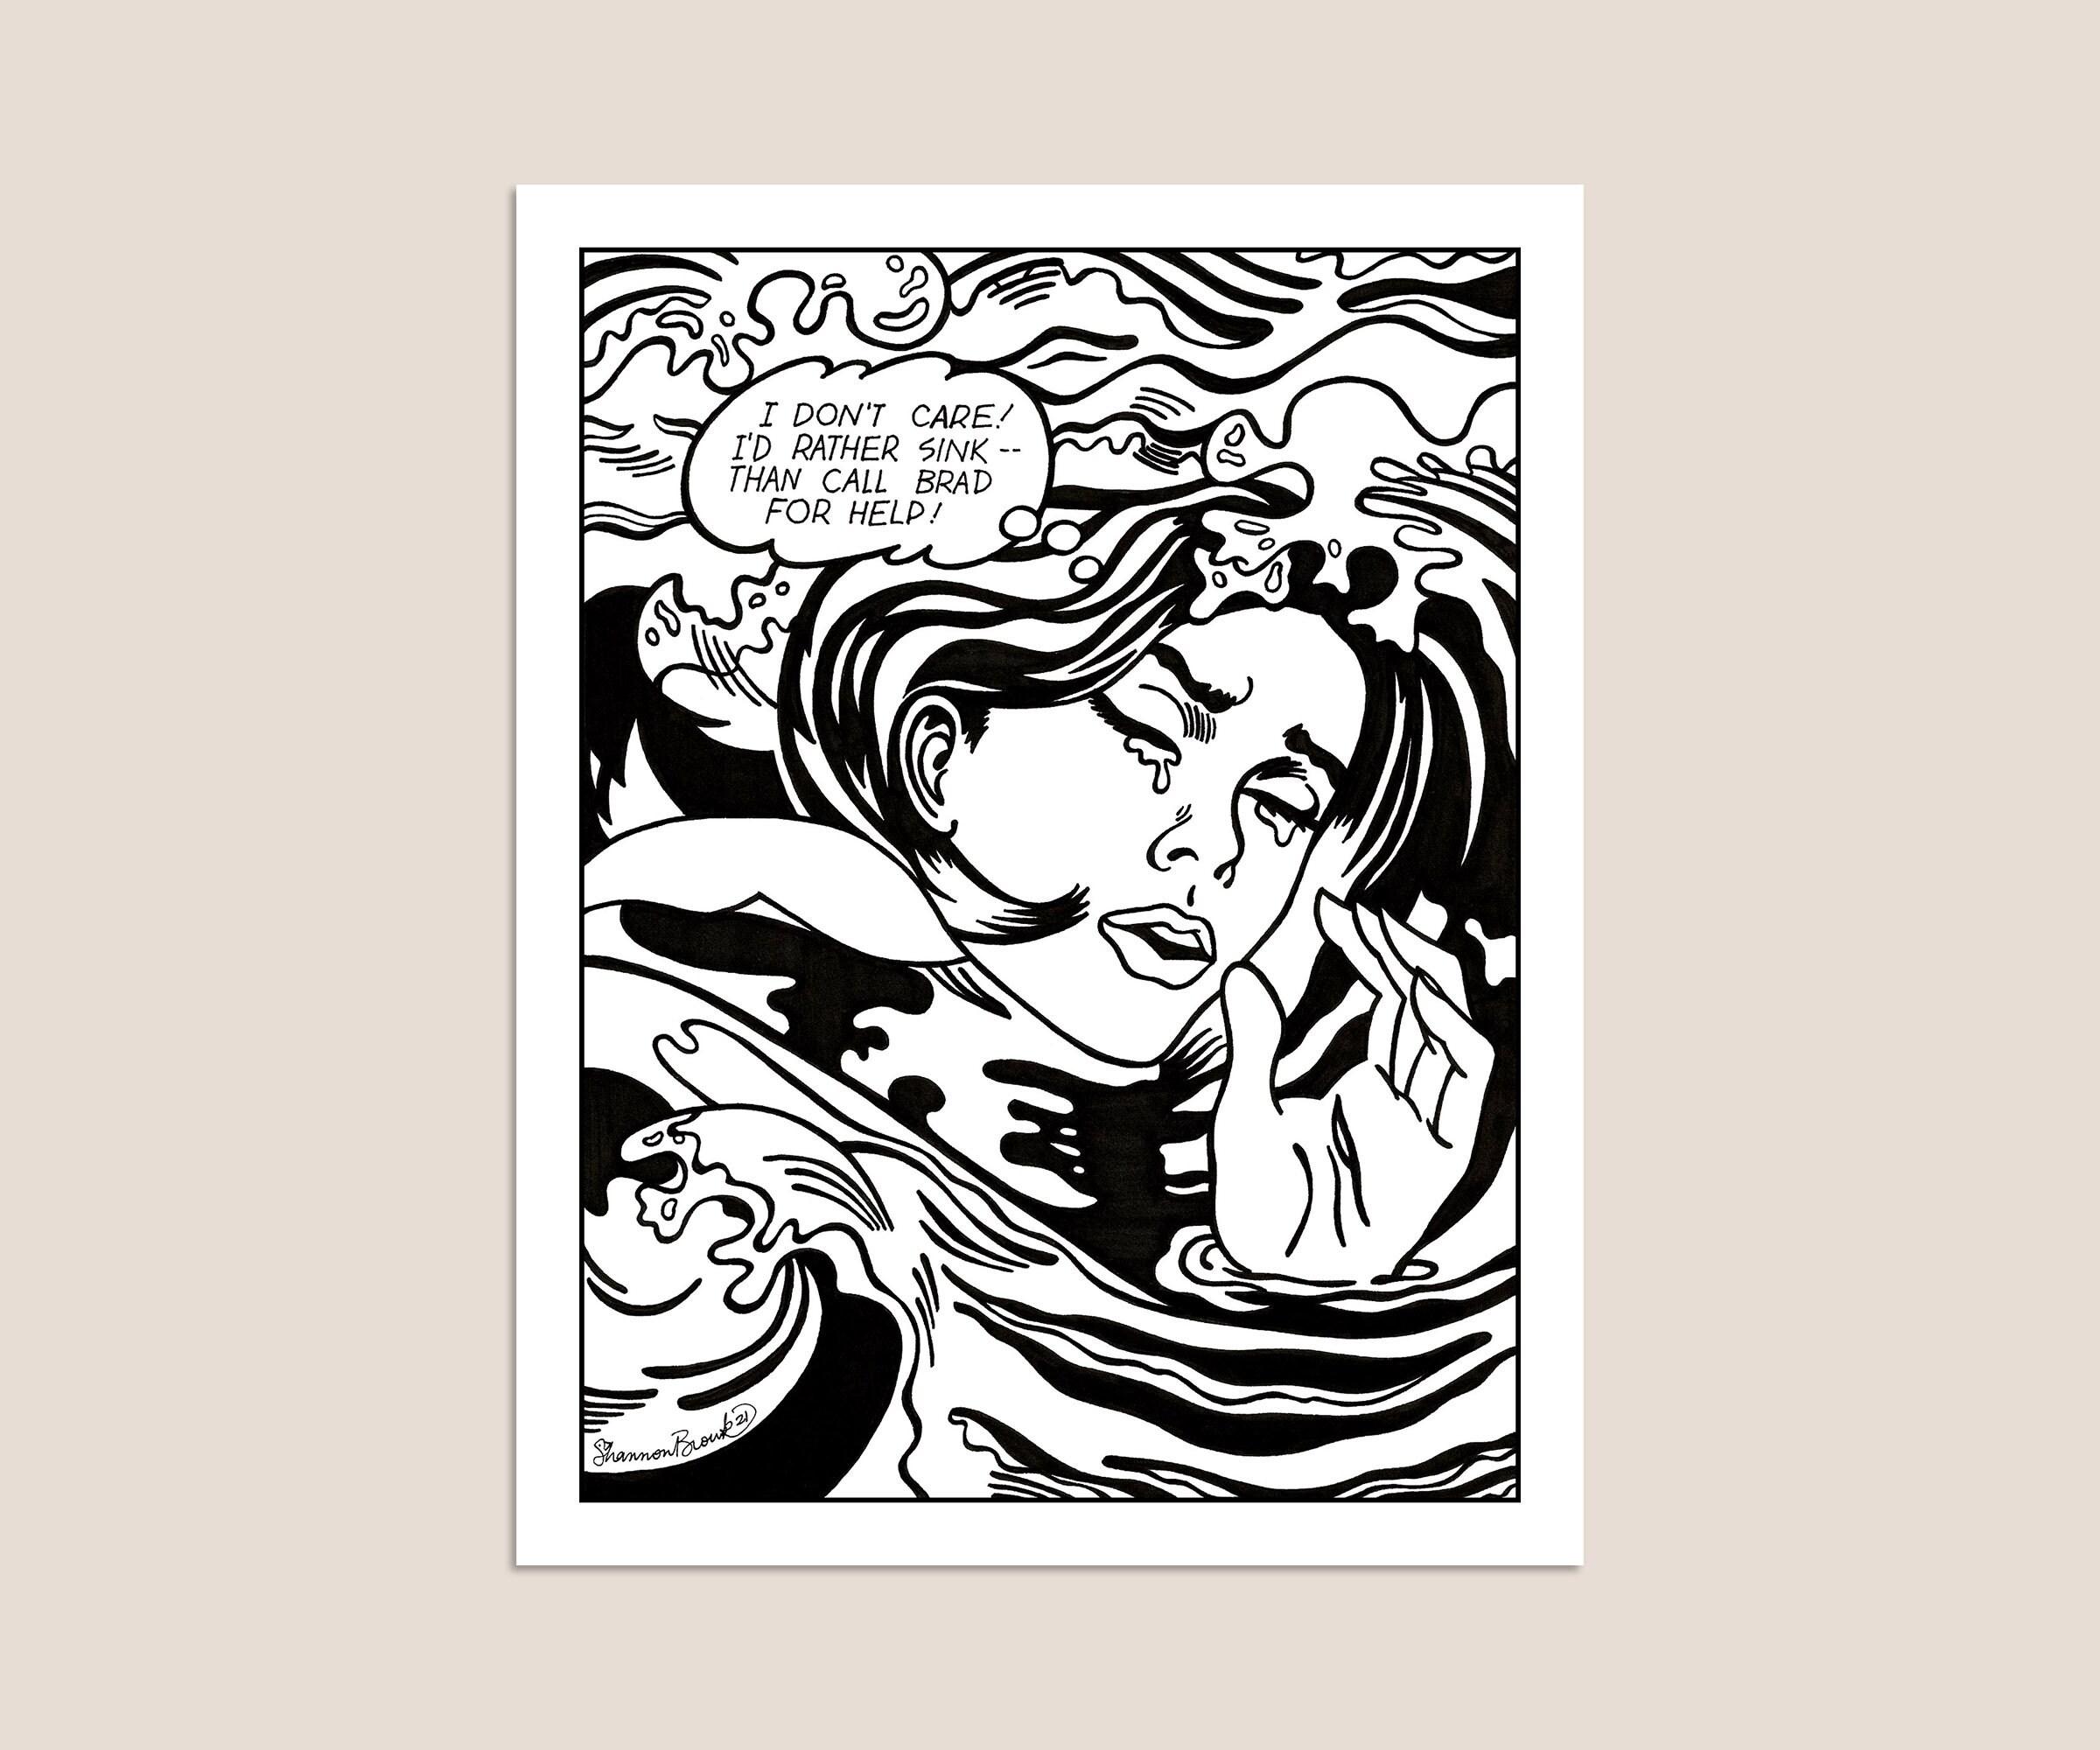 Drowning girl roy lichtenstein pop art famous artist coloring page painting famous artist art history coloring page printable art download now